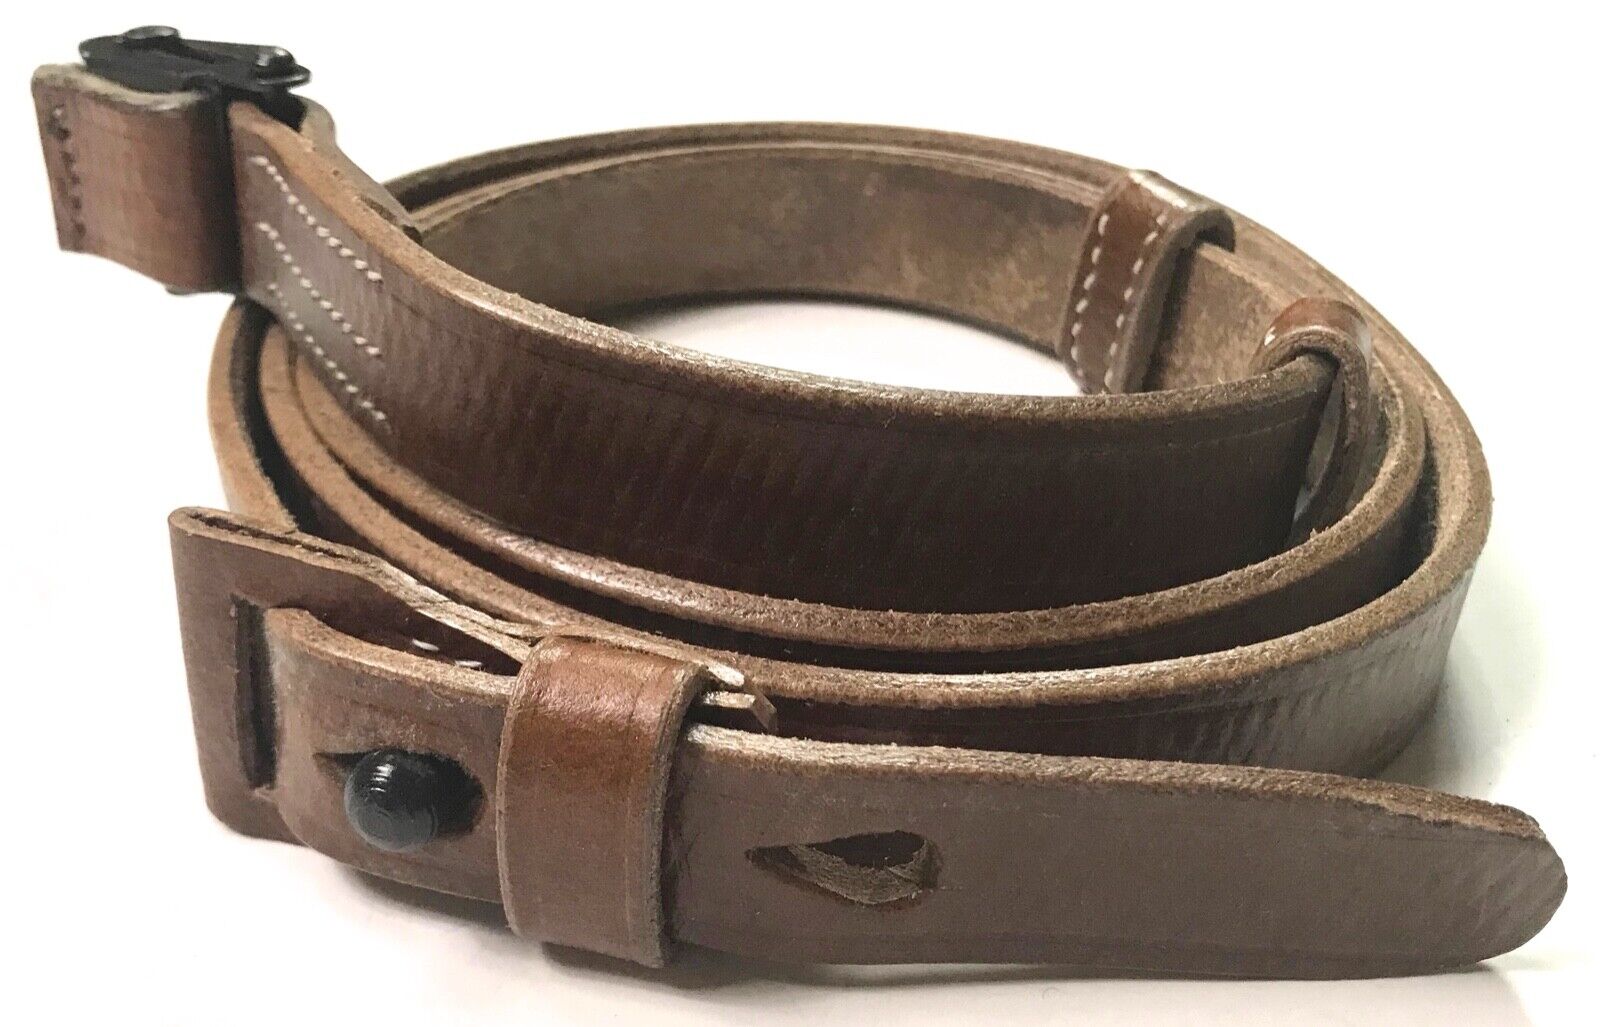 WWII GERMAN K98 98K RIFLE LEATHER RIFLE CARRY SLING-BROWN LEATHER